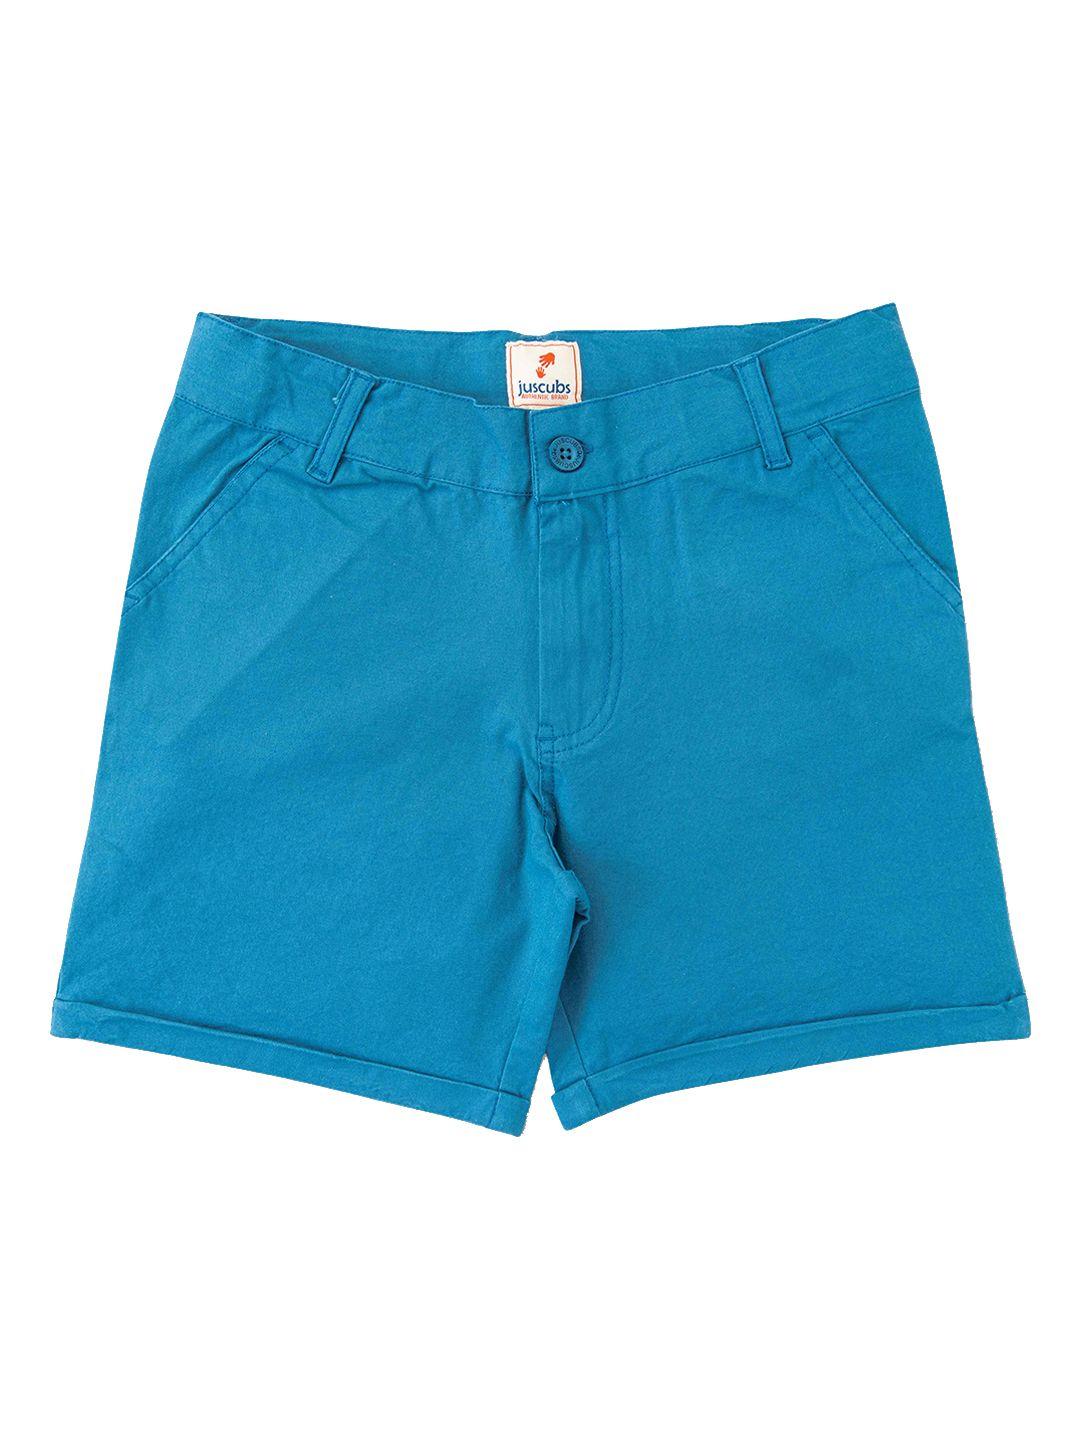 juscubs boys mid-rise cotton shorts